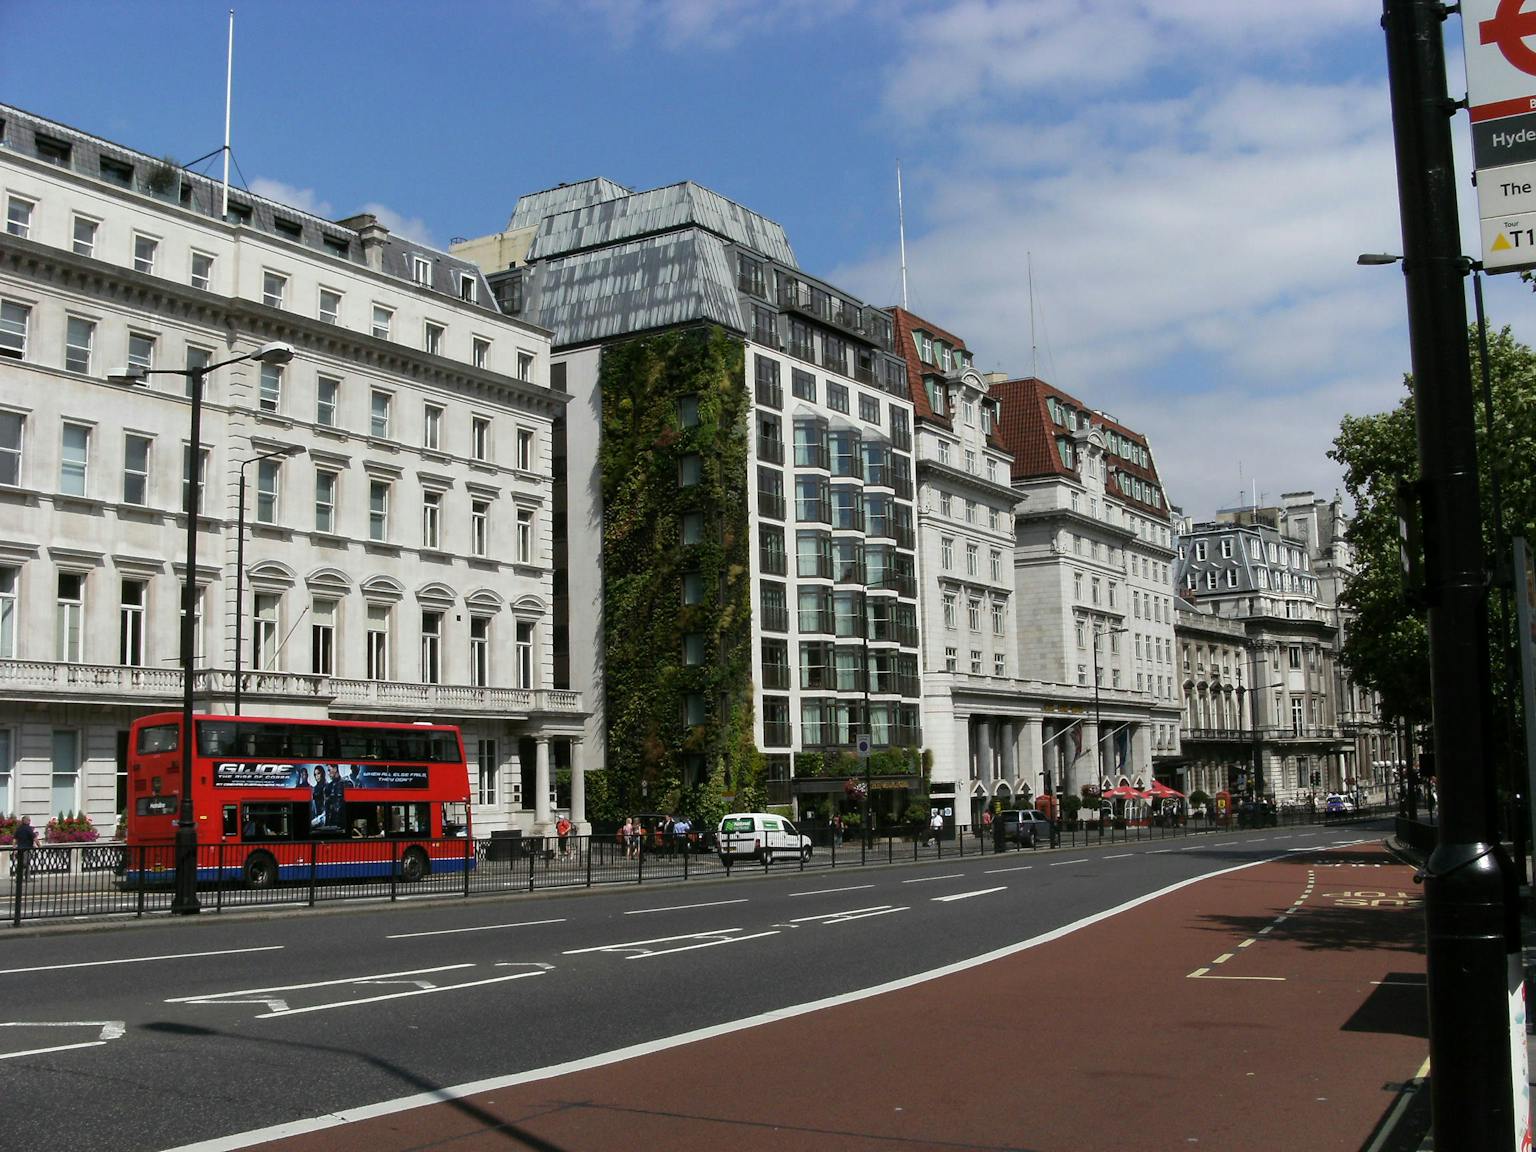 The luxury, Art Deco Athenaeum Hotel in Piccadilly, London, after Purcell's renovations